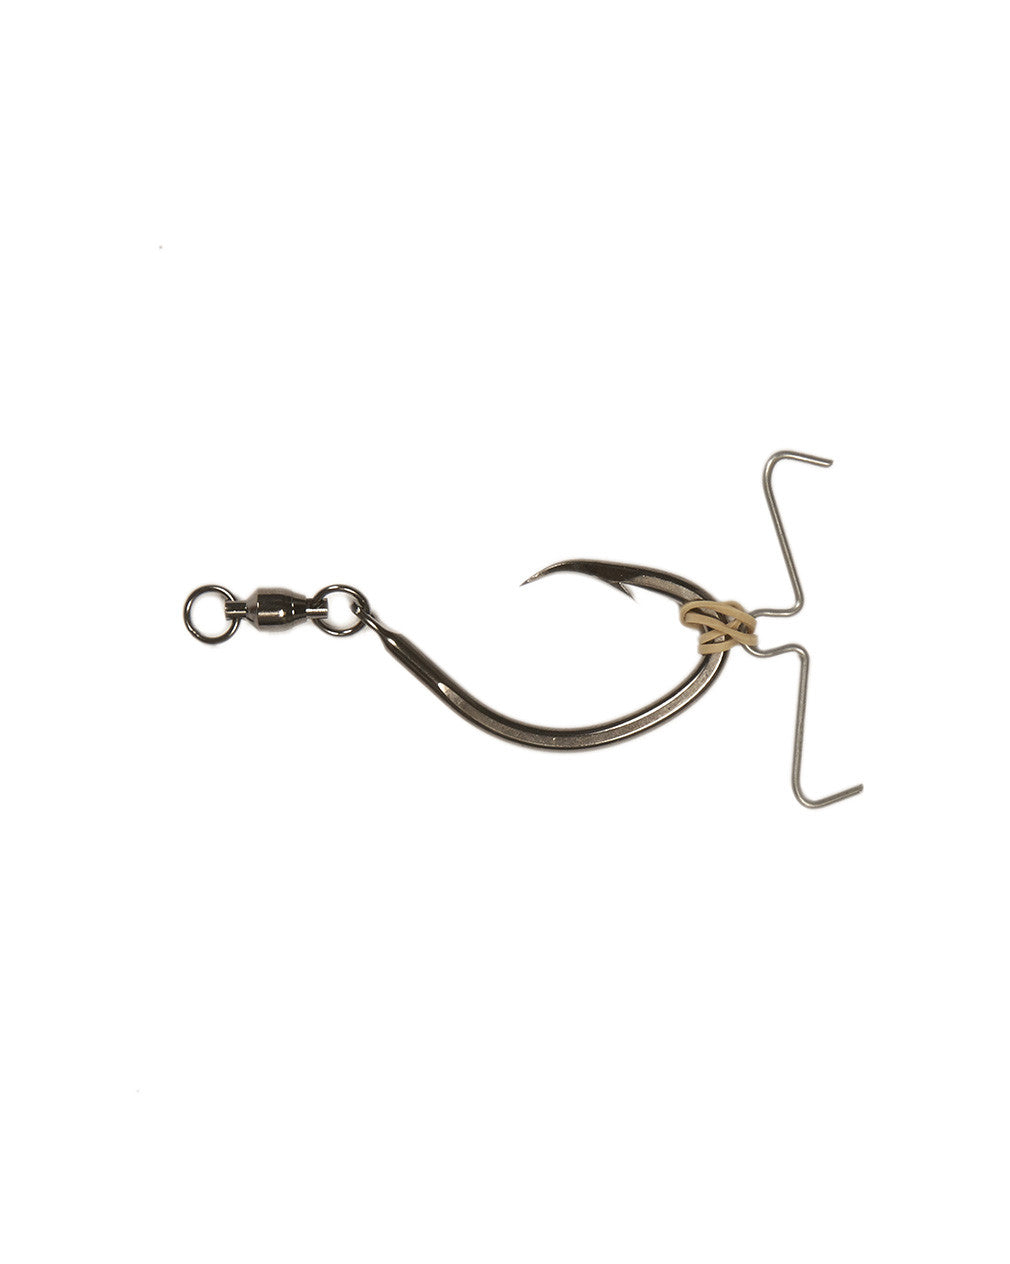 Charlie Brown Circle Hook with ball bearing swivel (Pack 5) – Open